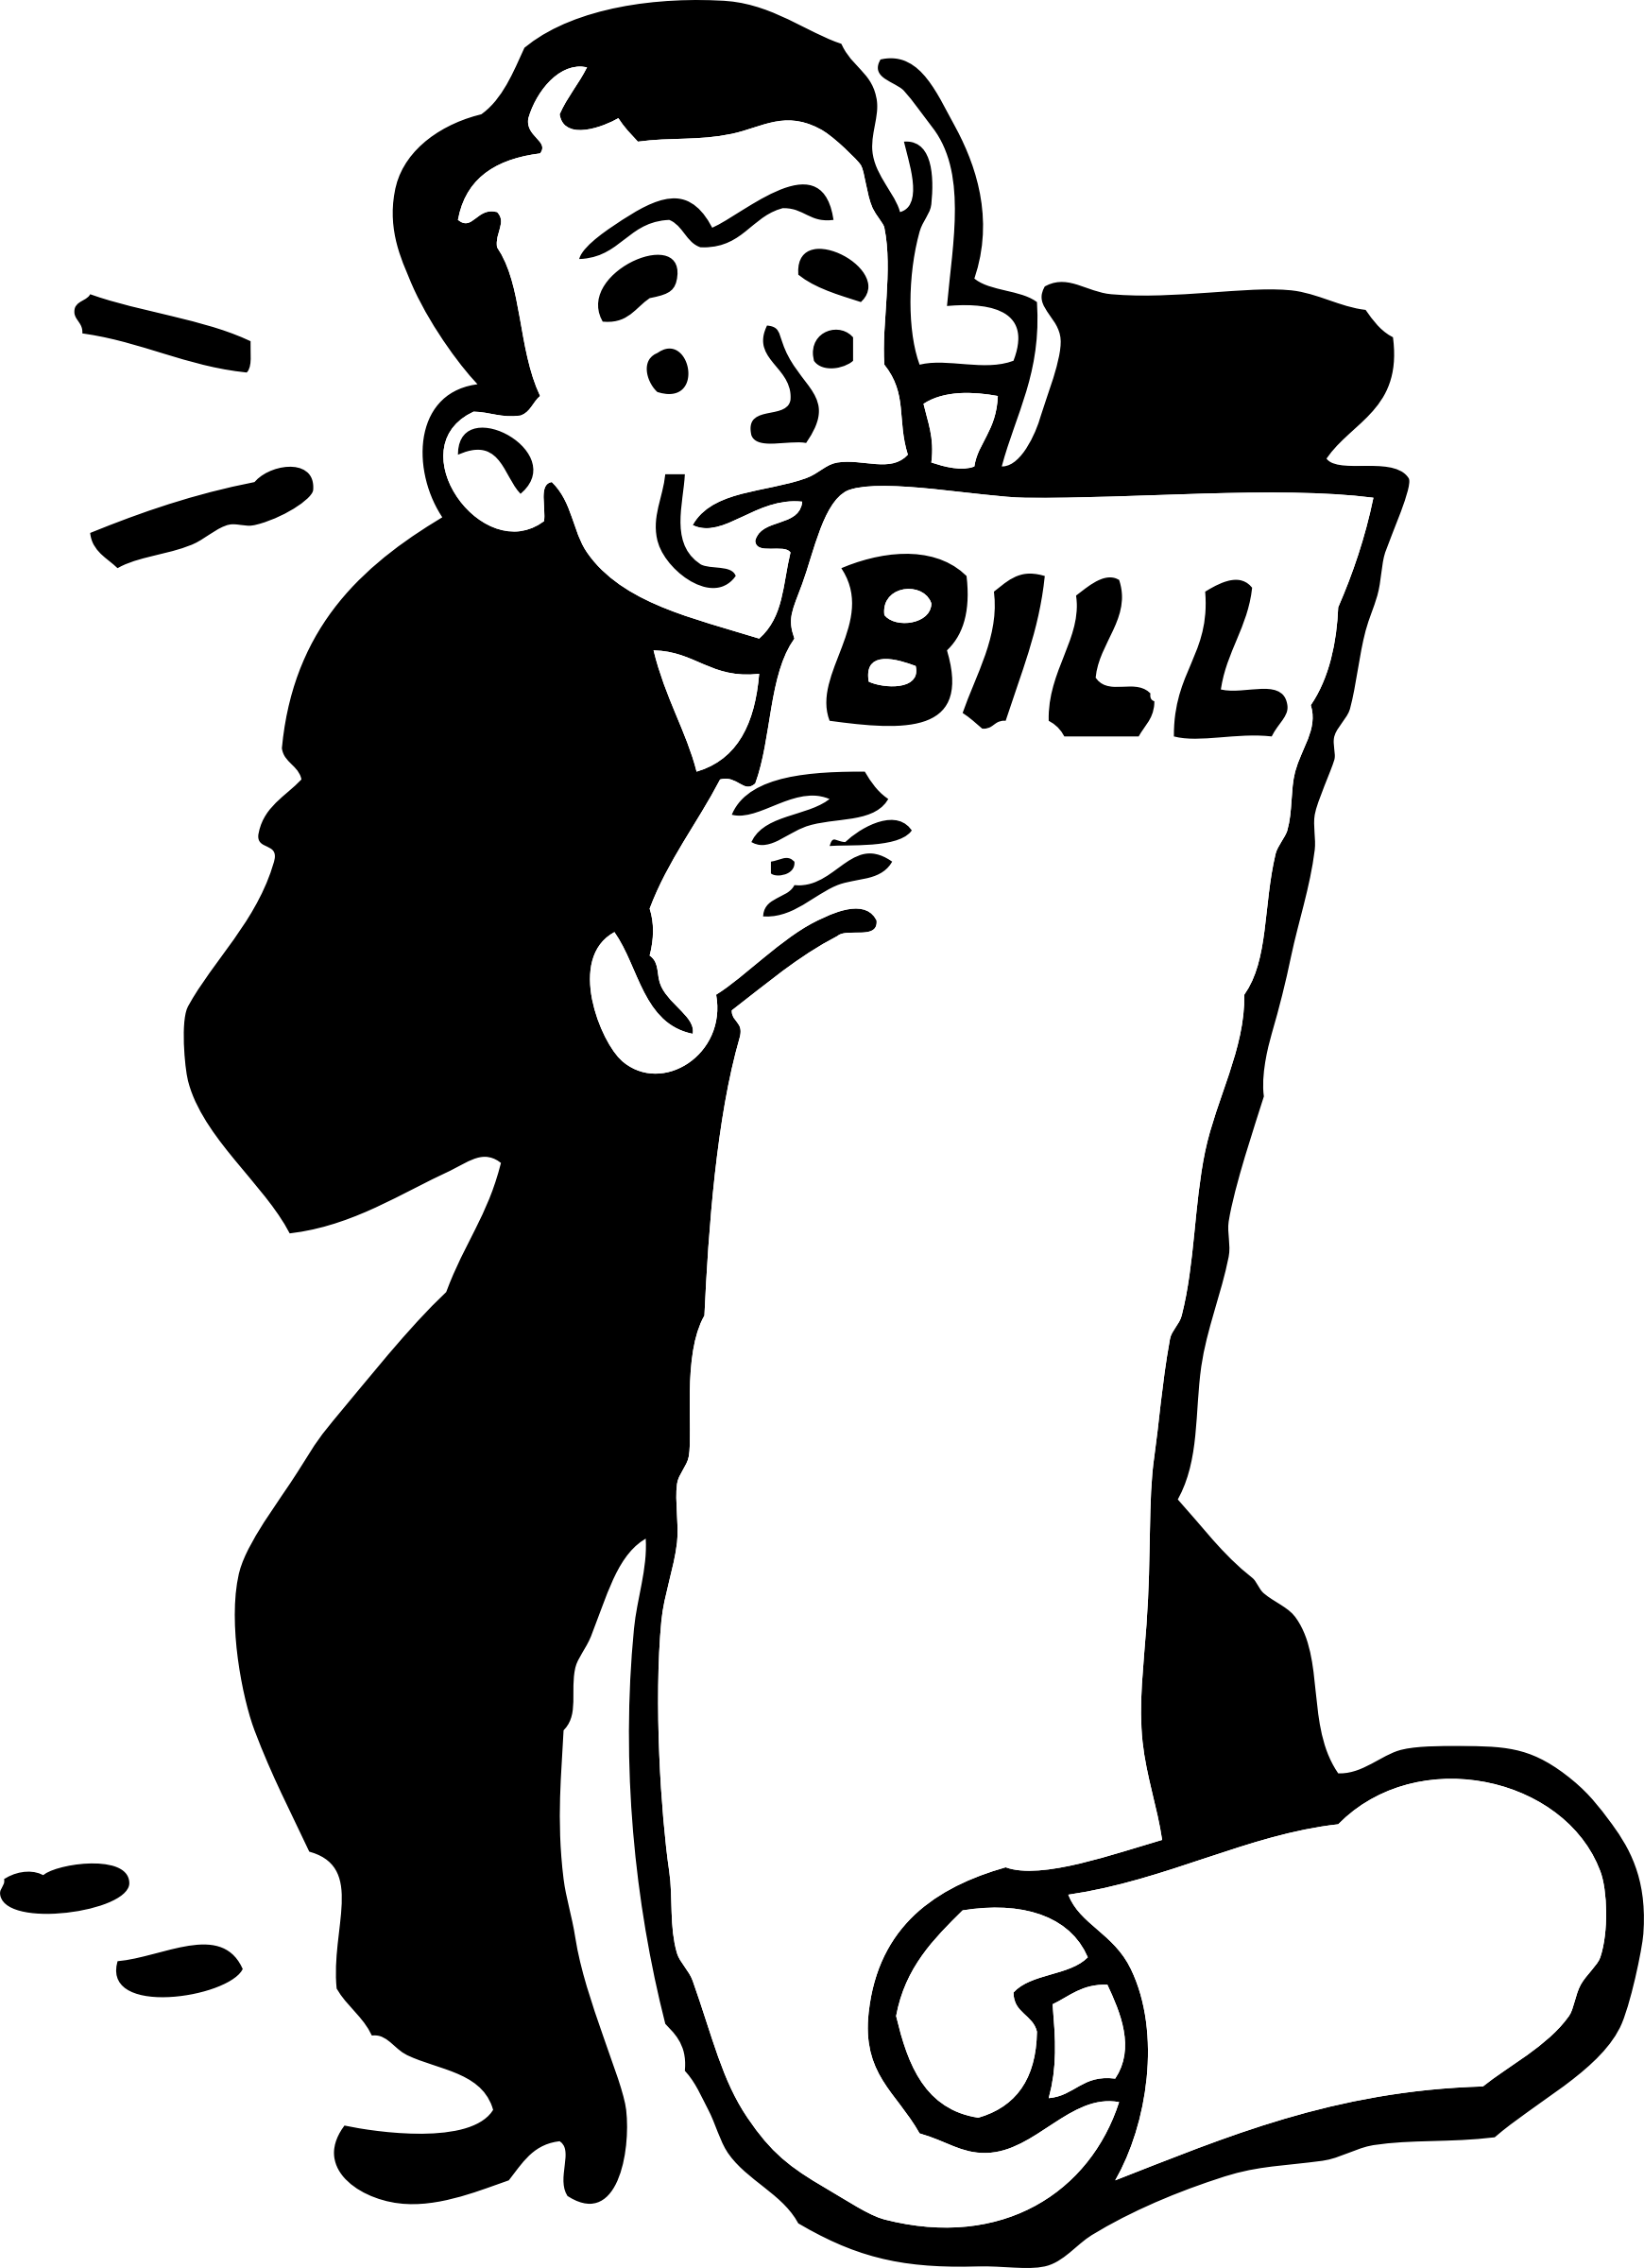 Worry clipart academic stress. Worried about a bill